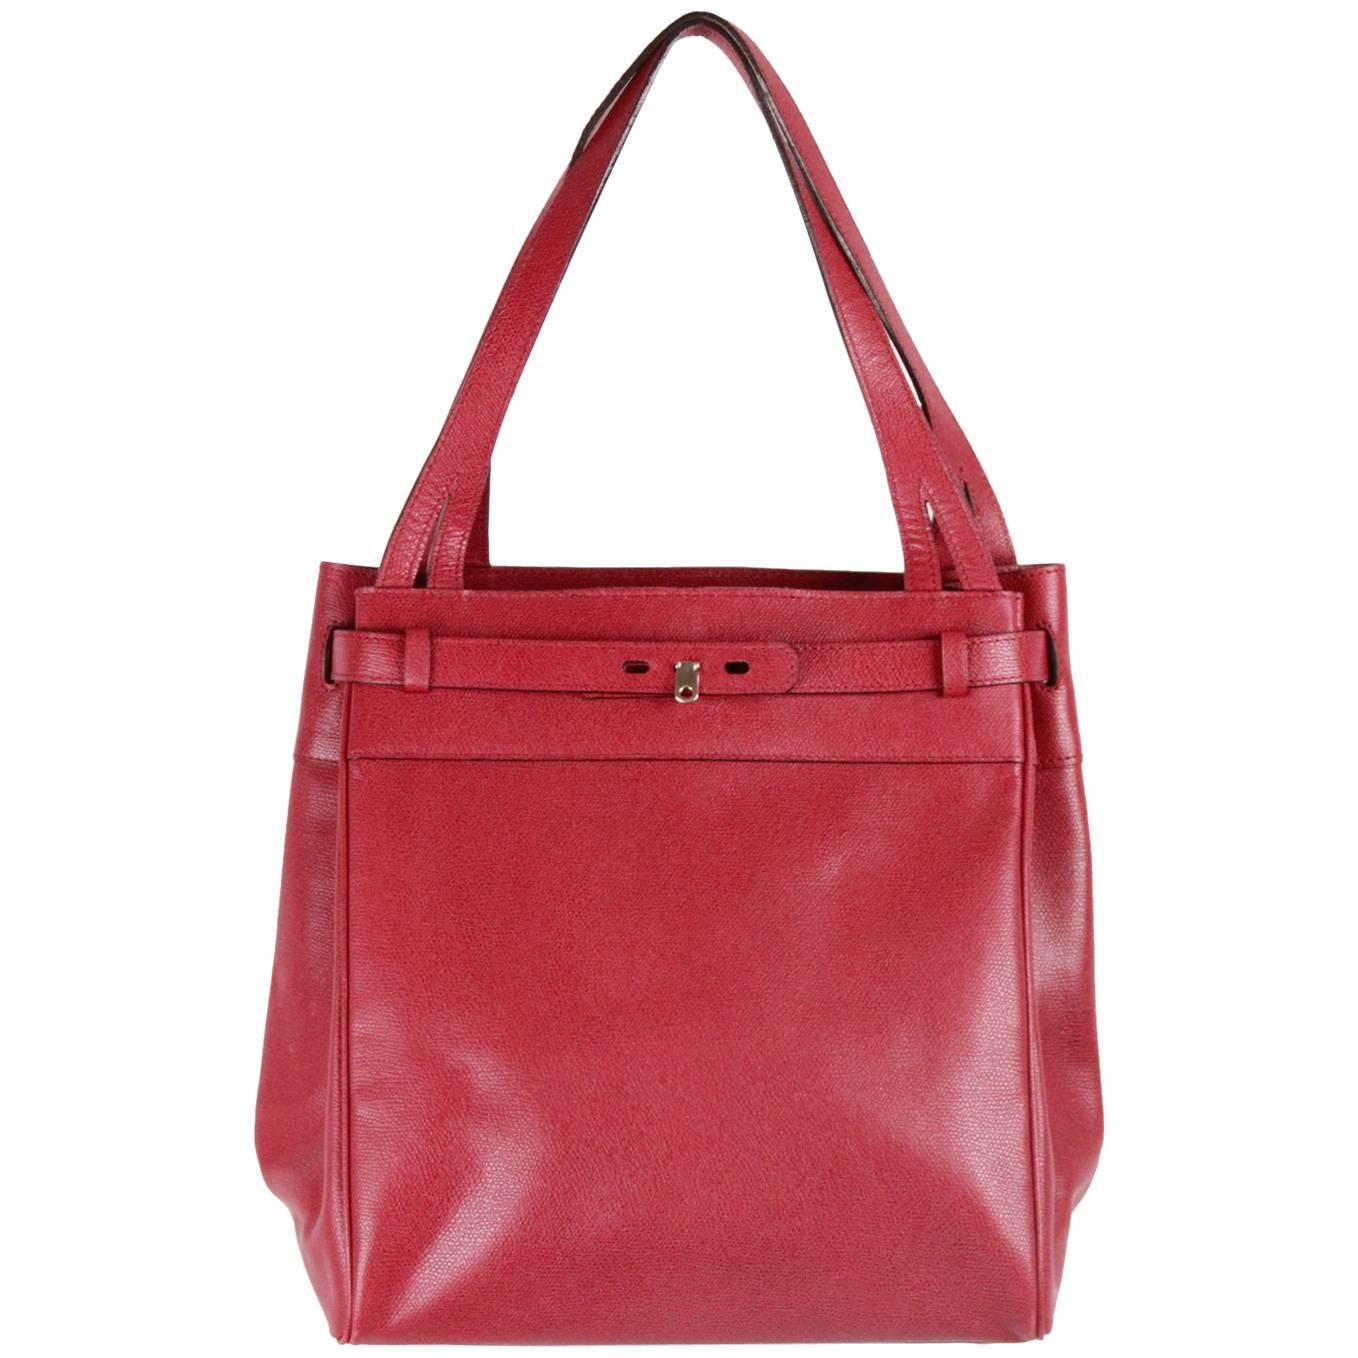 VALEXTRA MILANO Burgundy Leather B CUBE Bag TOTE